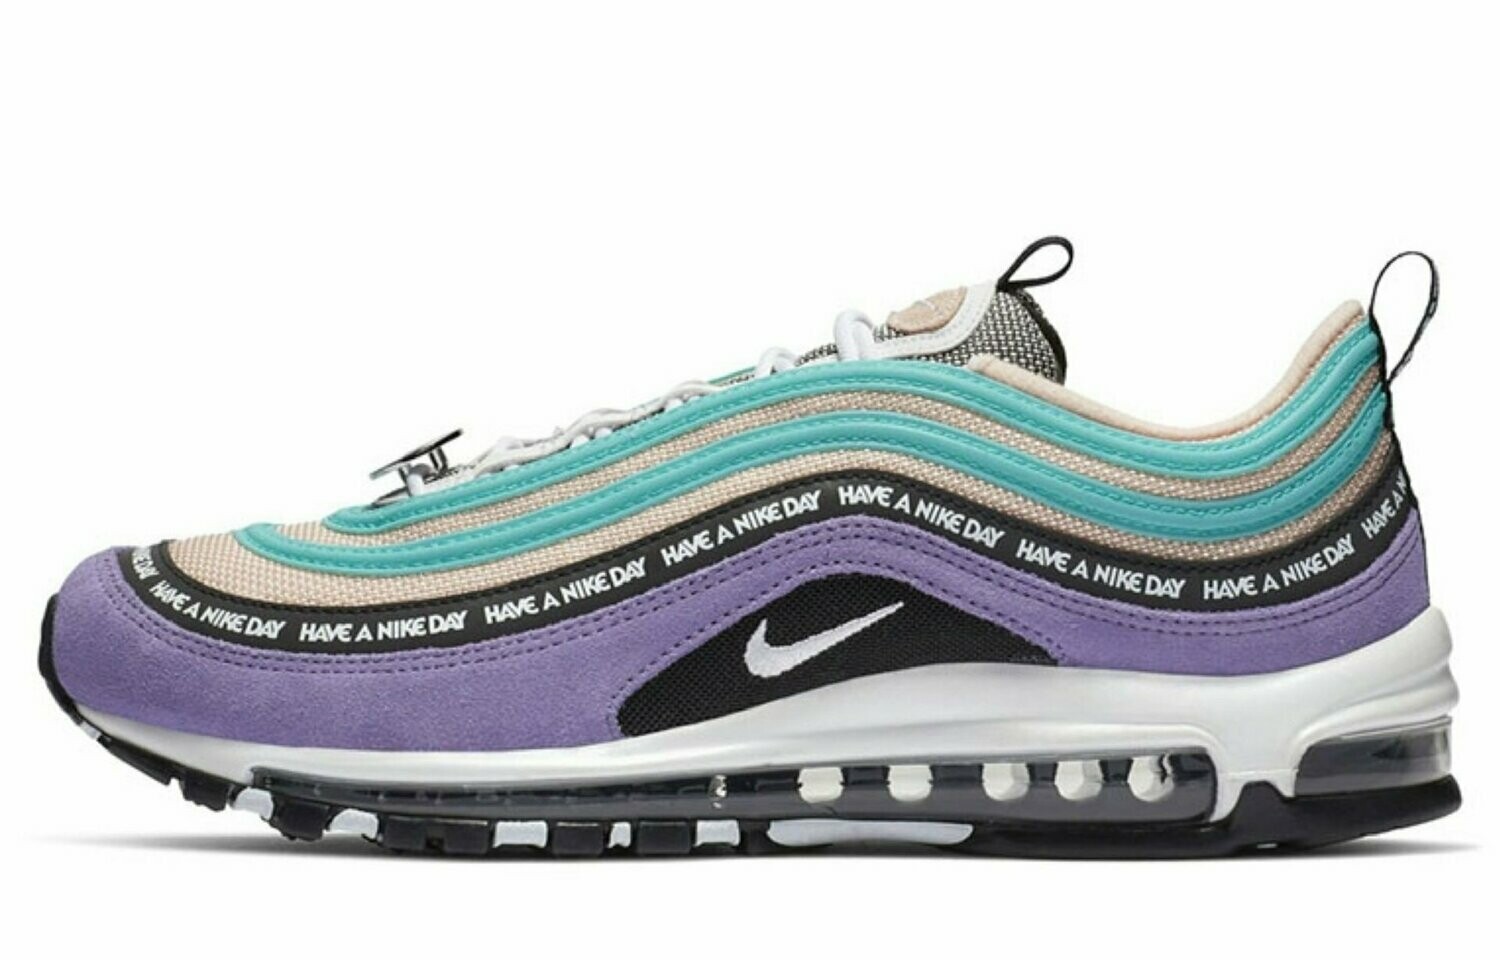 97 "Have a Nike Day"